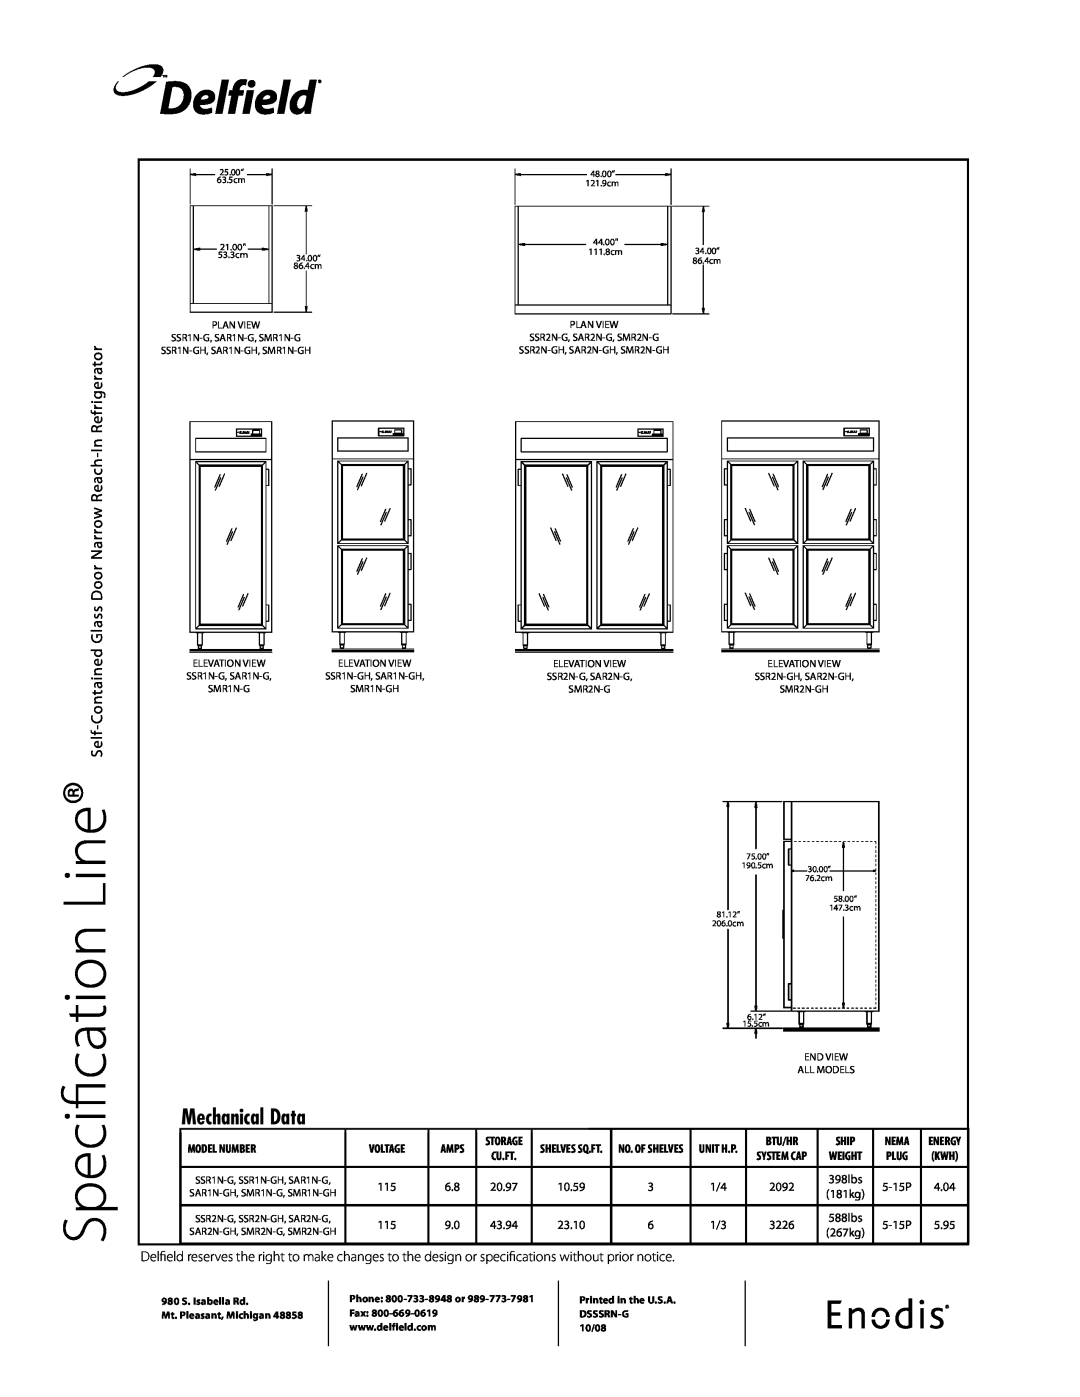 Delfield SSR1N-G Specification Line, Delfield, Mechanical Data, Refrigerator, Self-Contained Glass Door Narrow Reach-In 